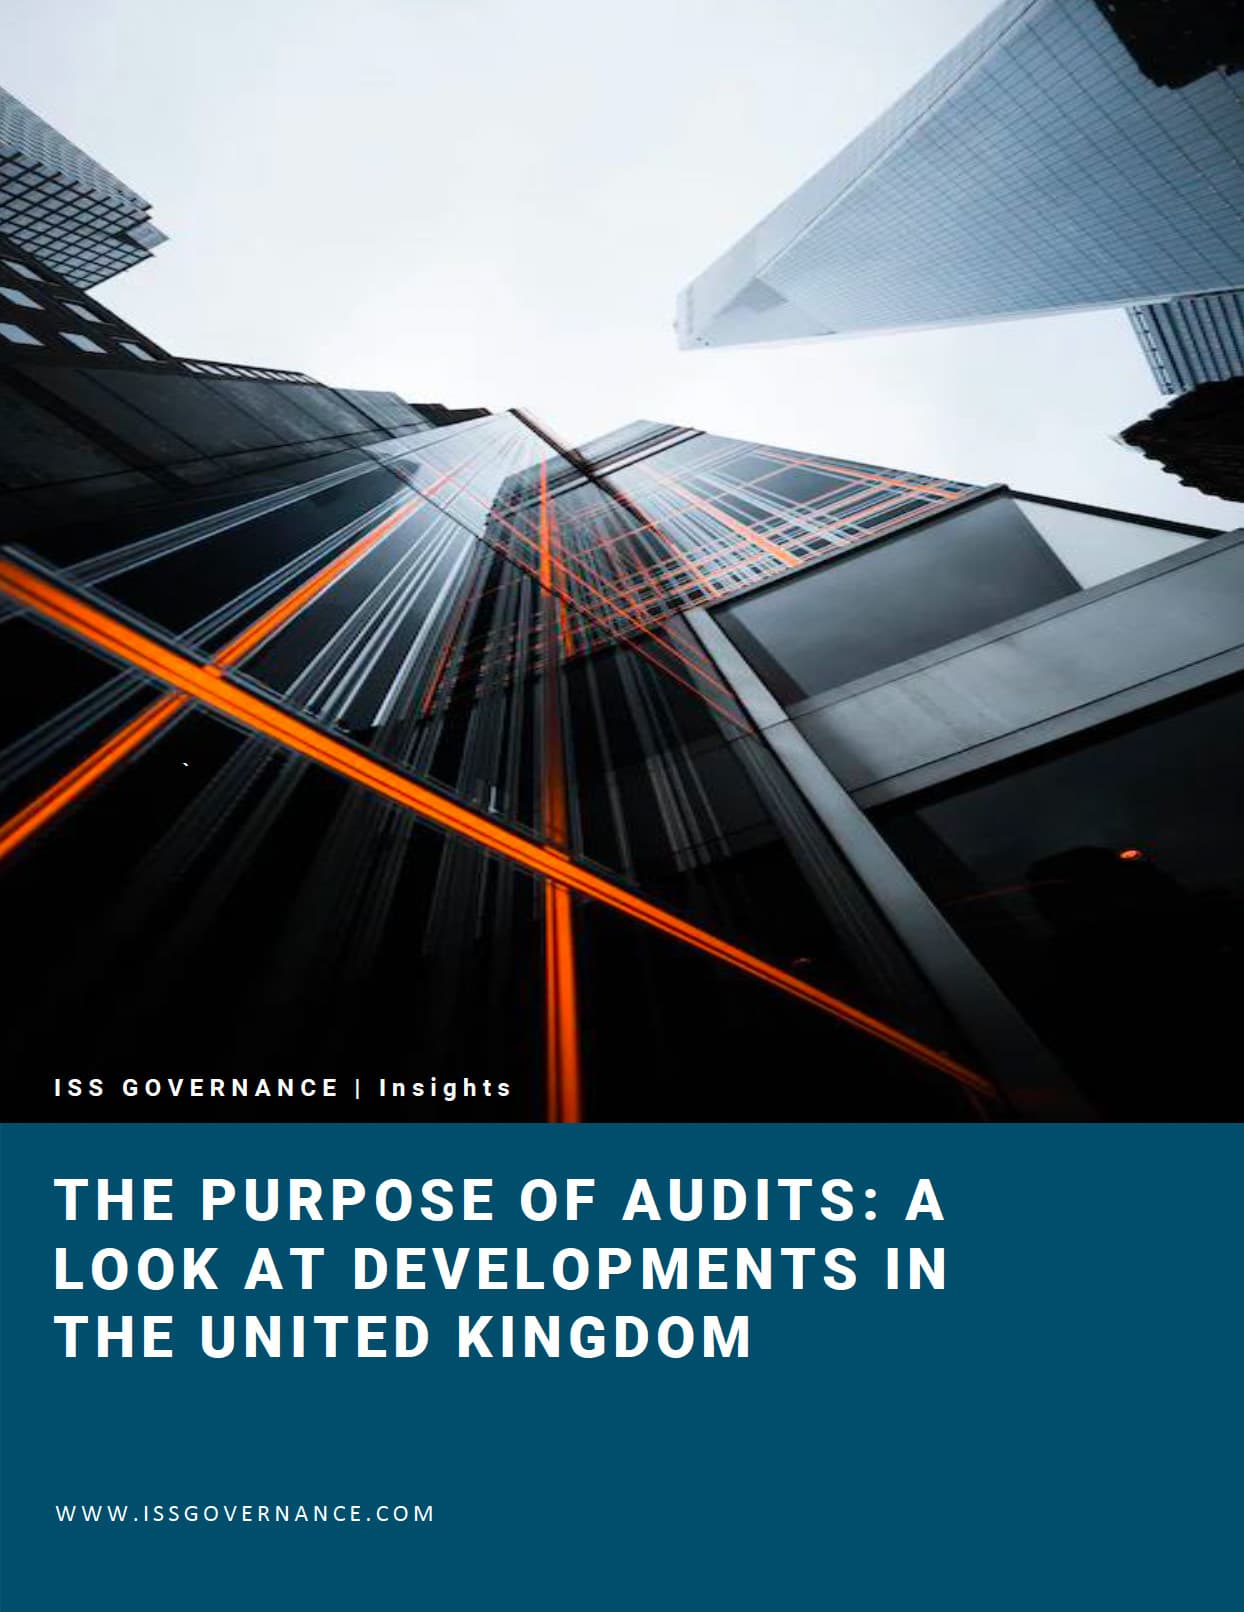 The Purpose of Audits: A Look at Developments in the United Kingdom